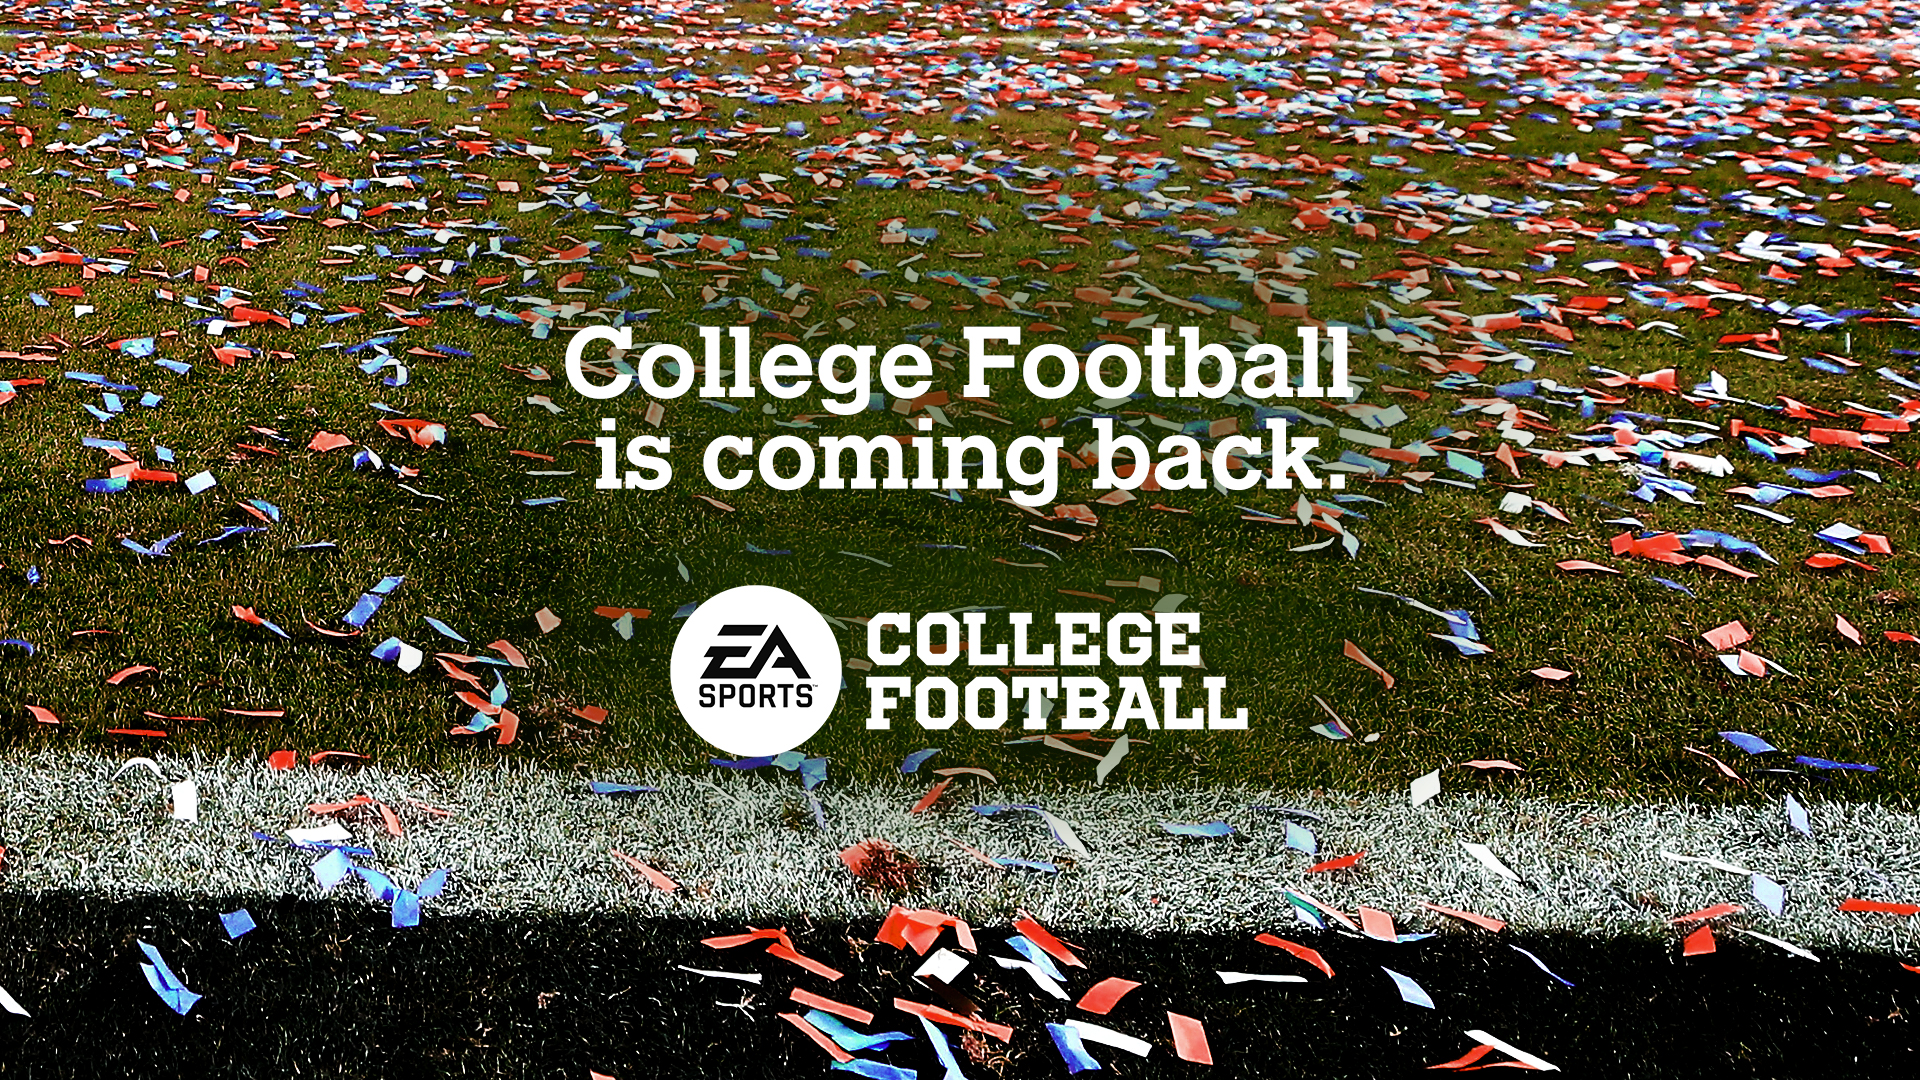 Twitter Reacts To EA Sports Bringing Back NCAA College Football Video Game